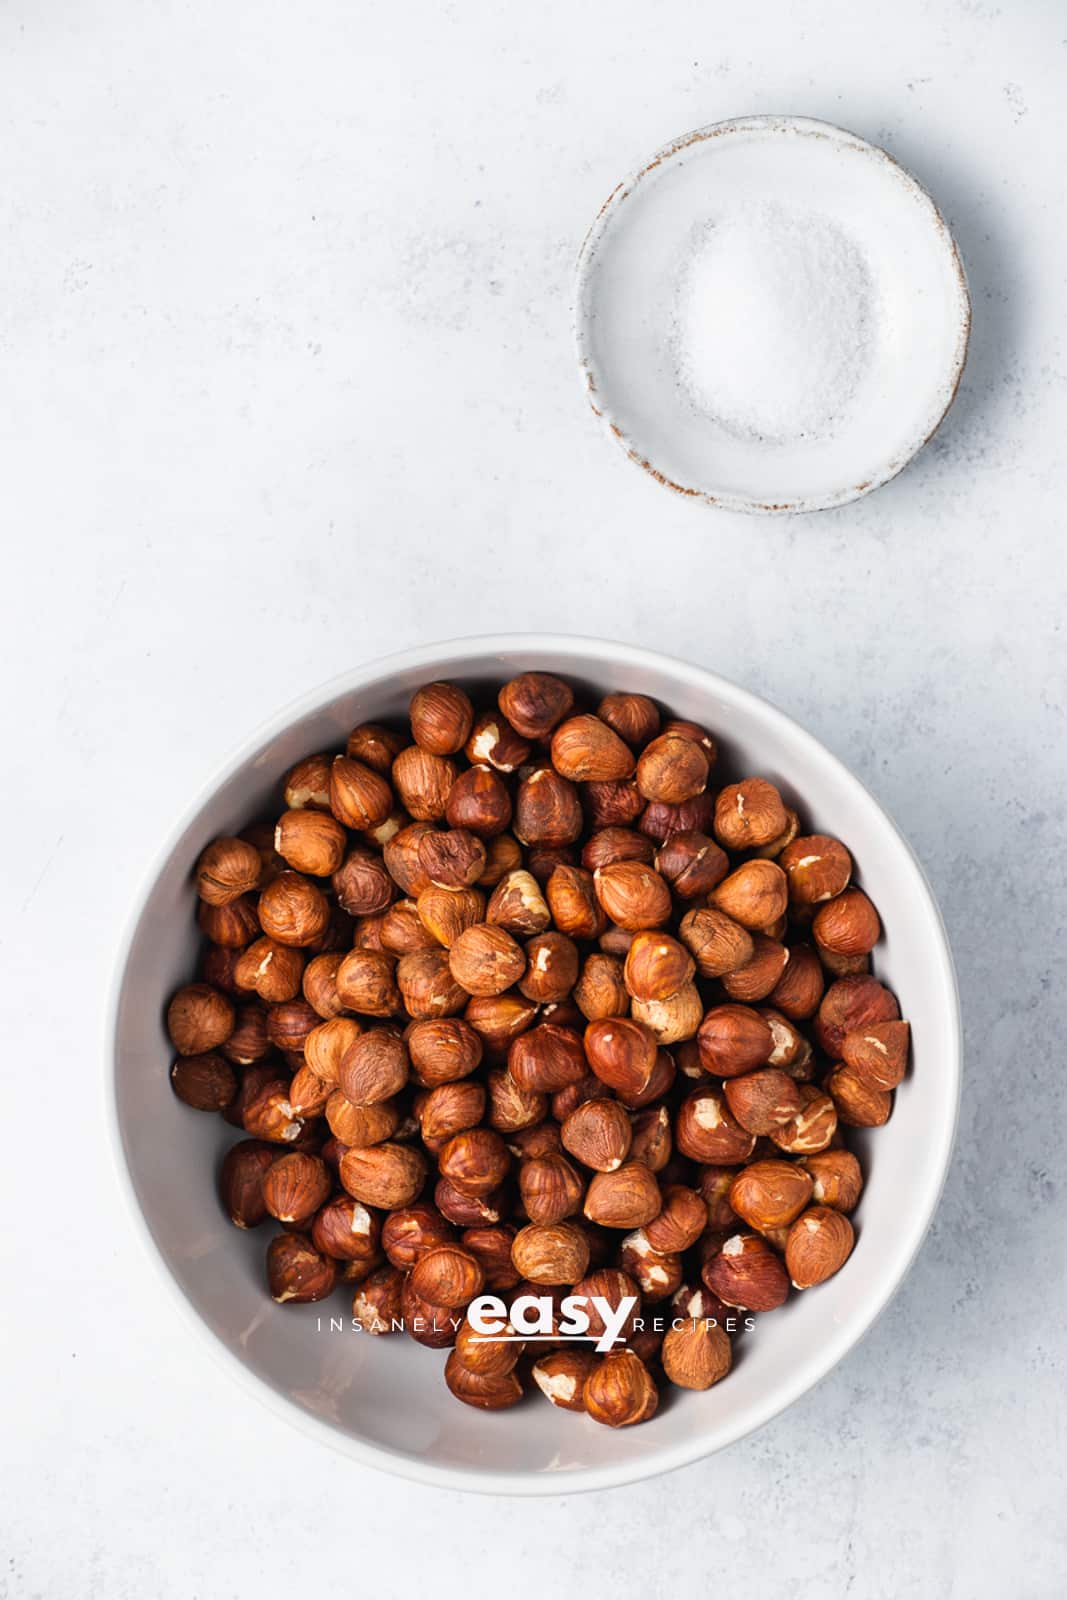 Top view photo of unroasted hazelnuts and salt in separate bowls.